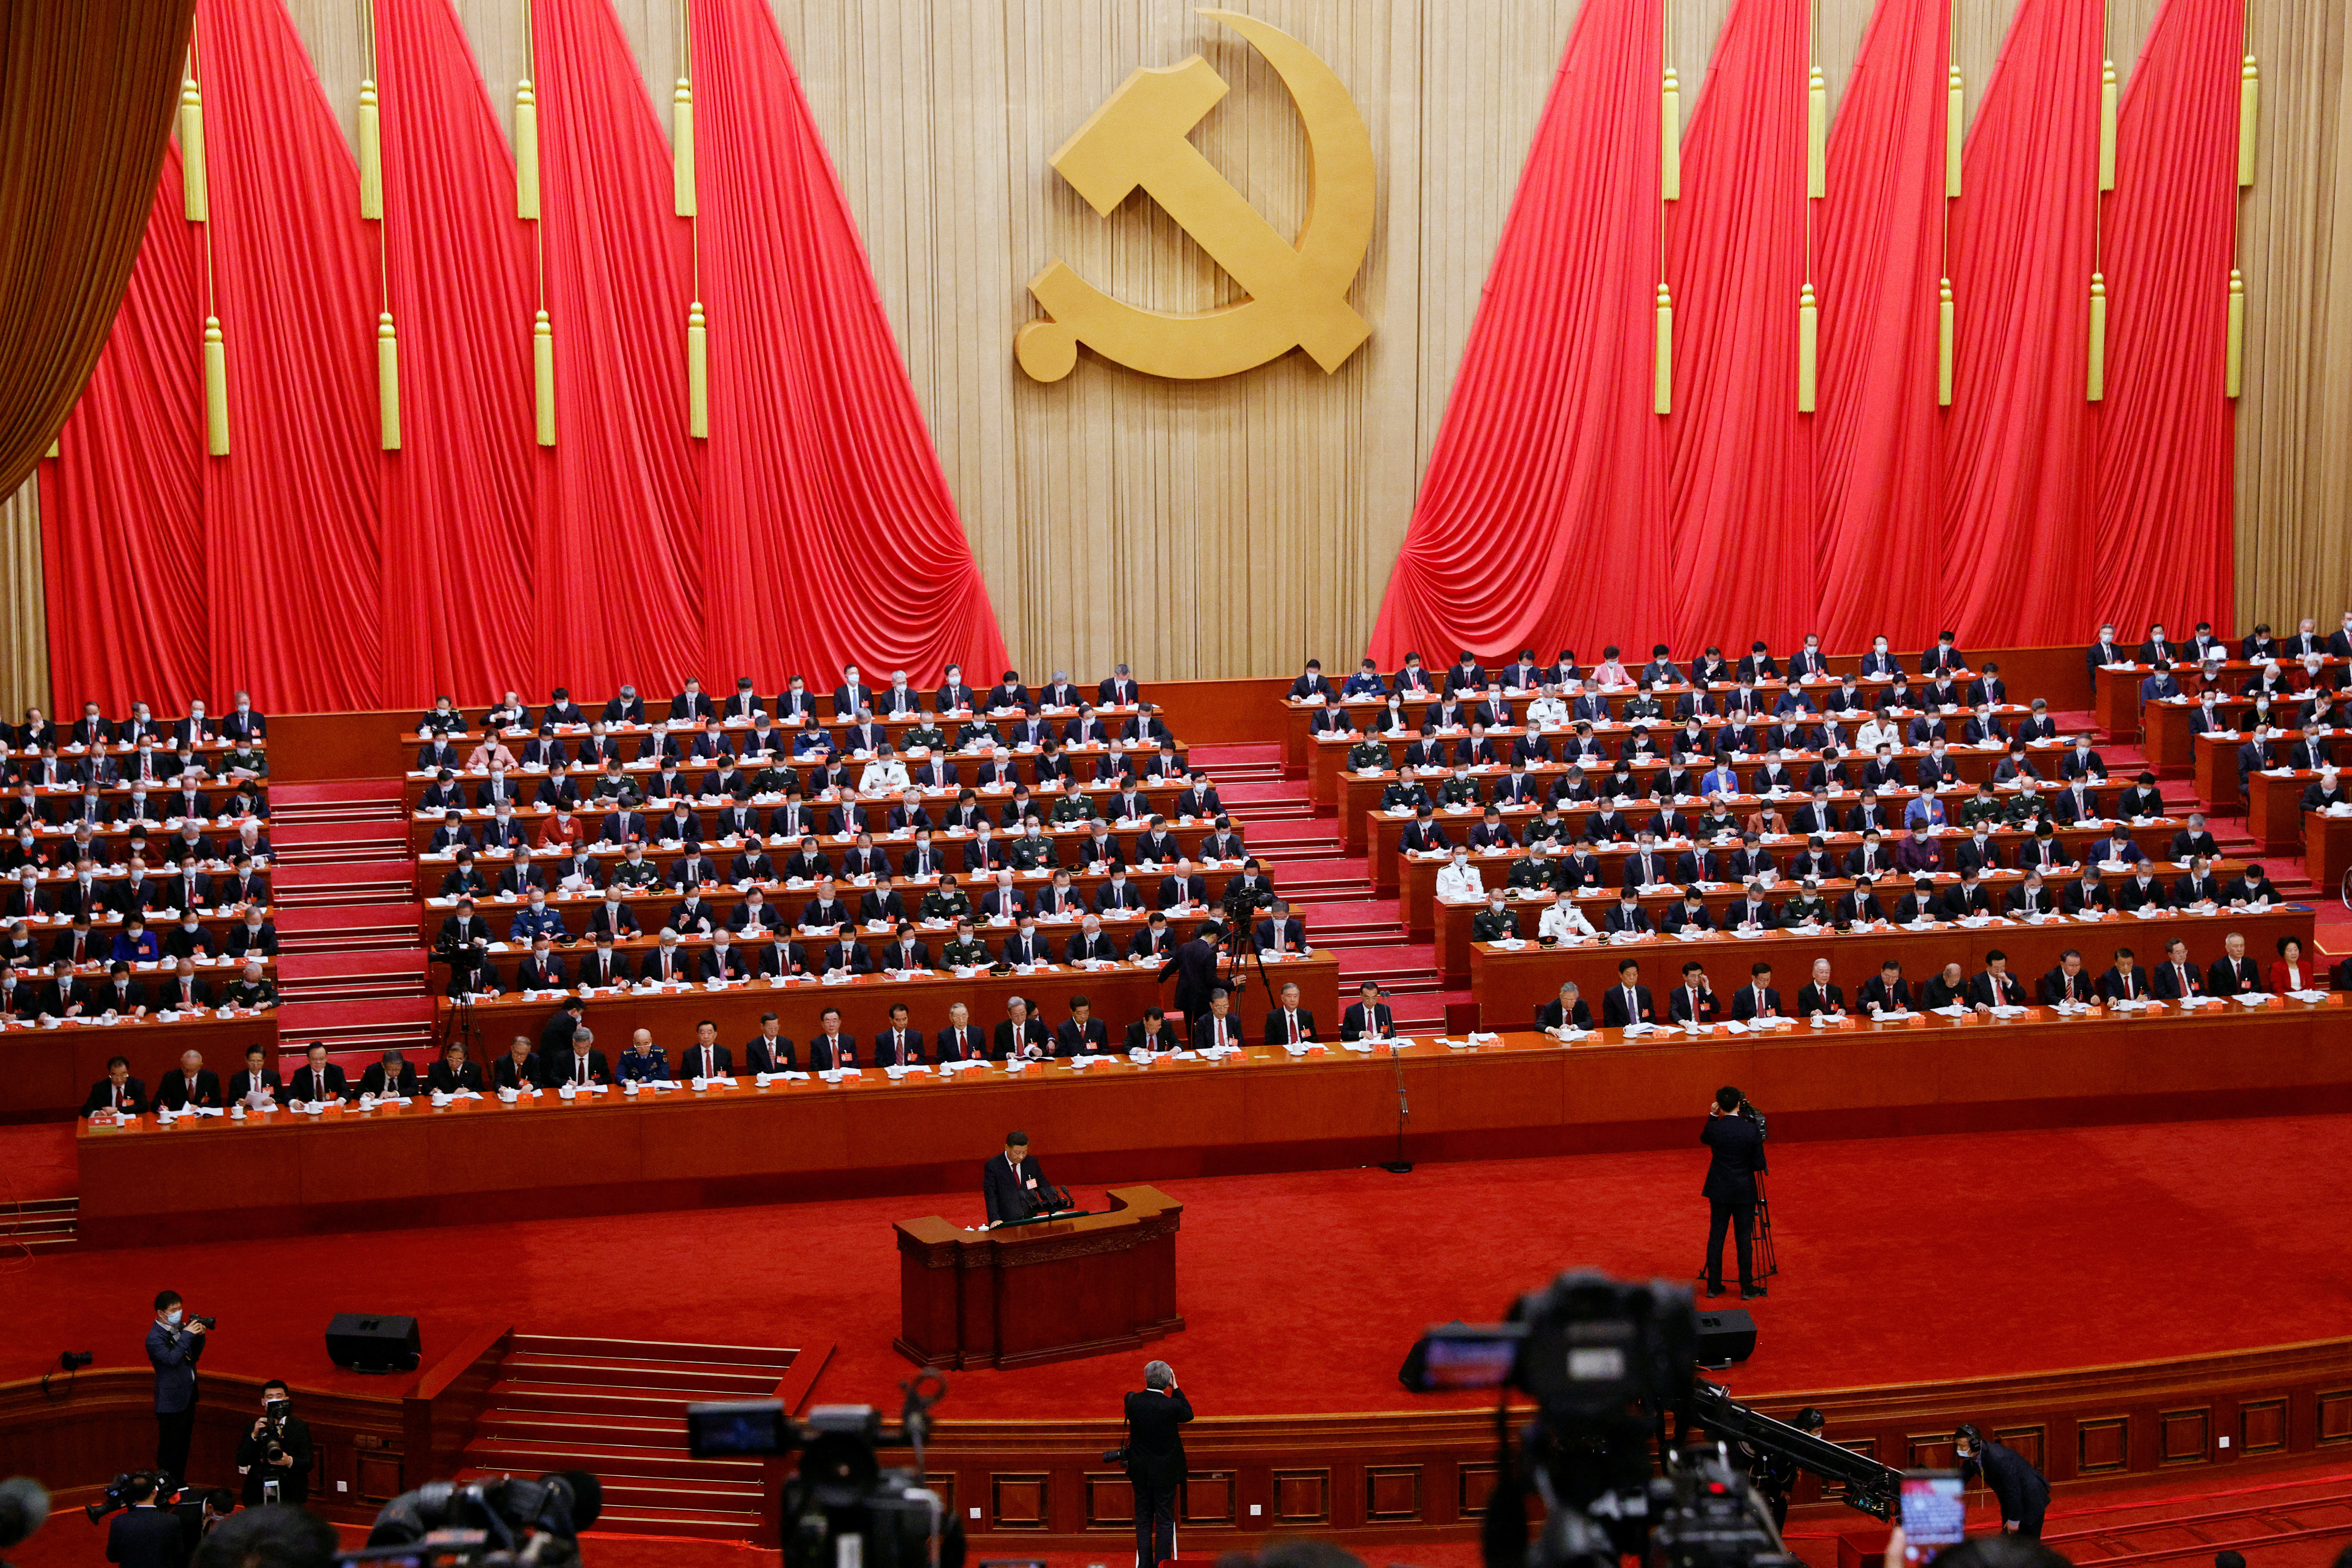 Chinese President Xi Jinping speaks at the opening ceremony of the 20th National Congress of the Communist Party of China at the Great Hall of the People in Beijing, China.